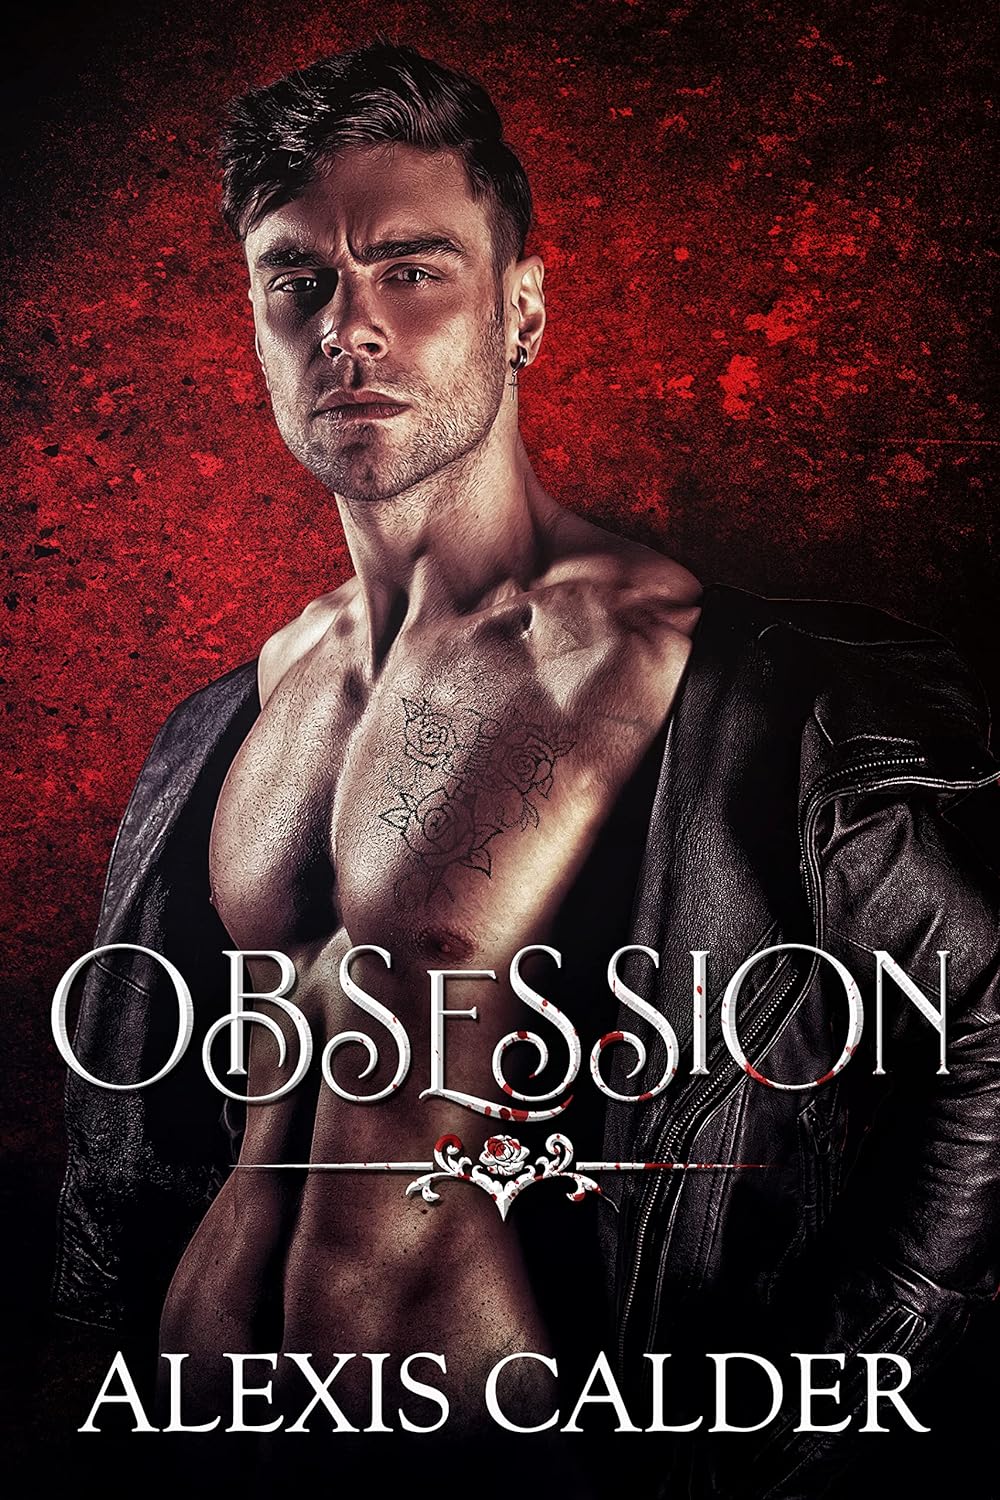 Obsession (Royal Blood Book 1) by Alexis Calder